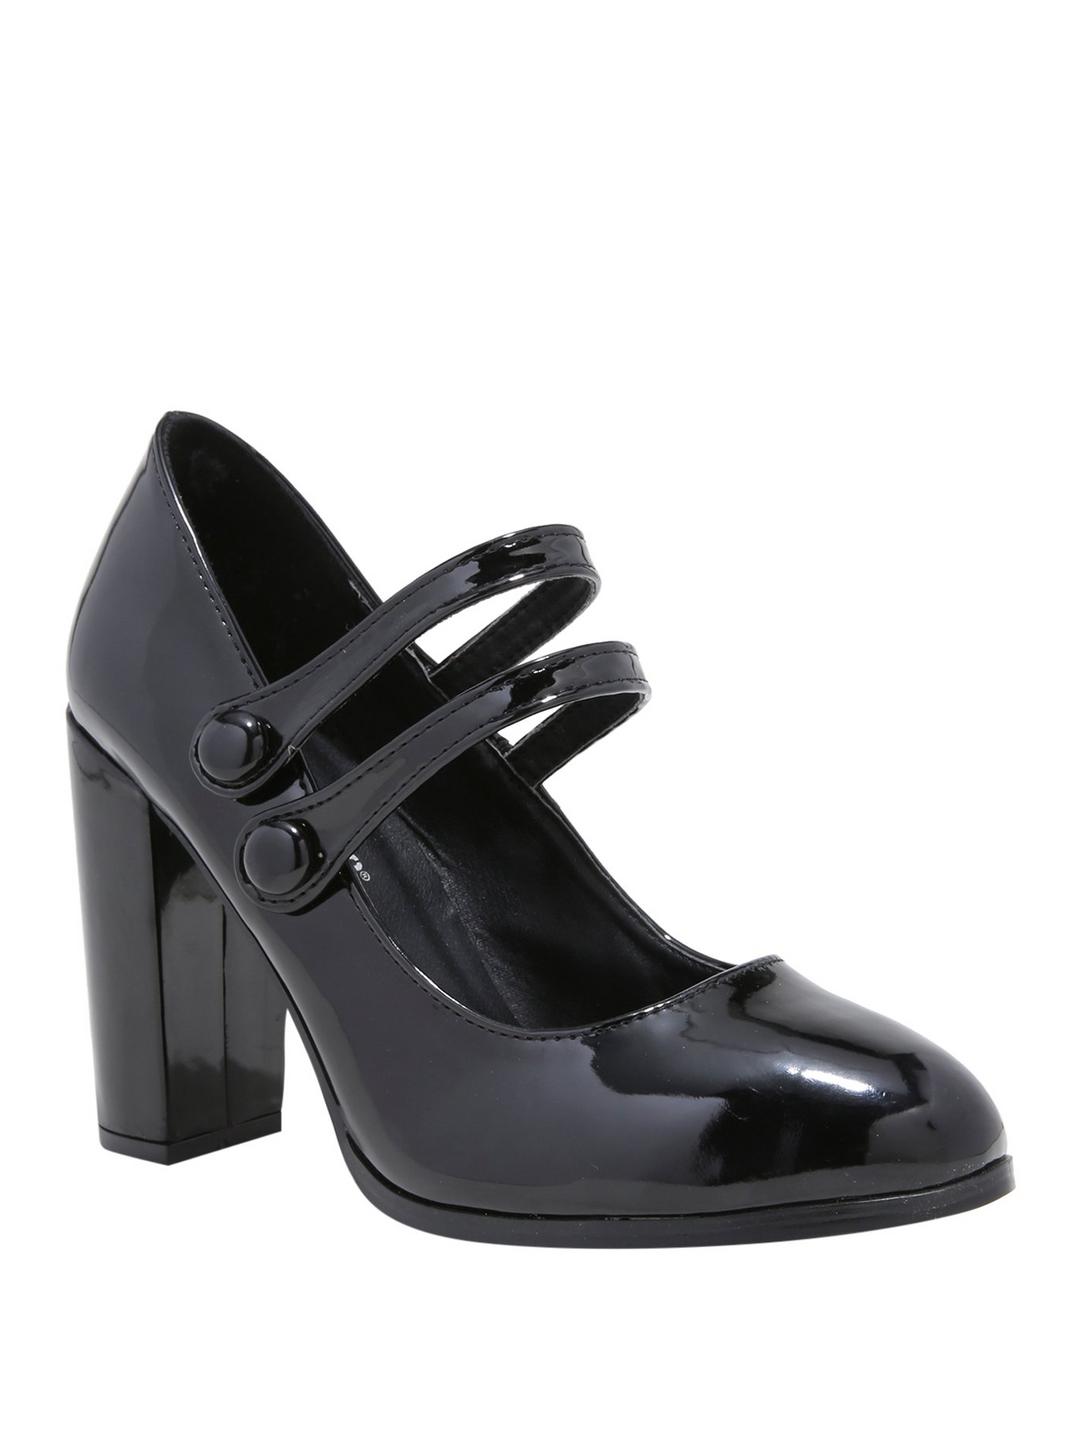 Black Round Toe Patent Leather Double Strap Mary Jane Heels | Hot Topic